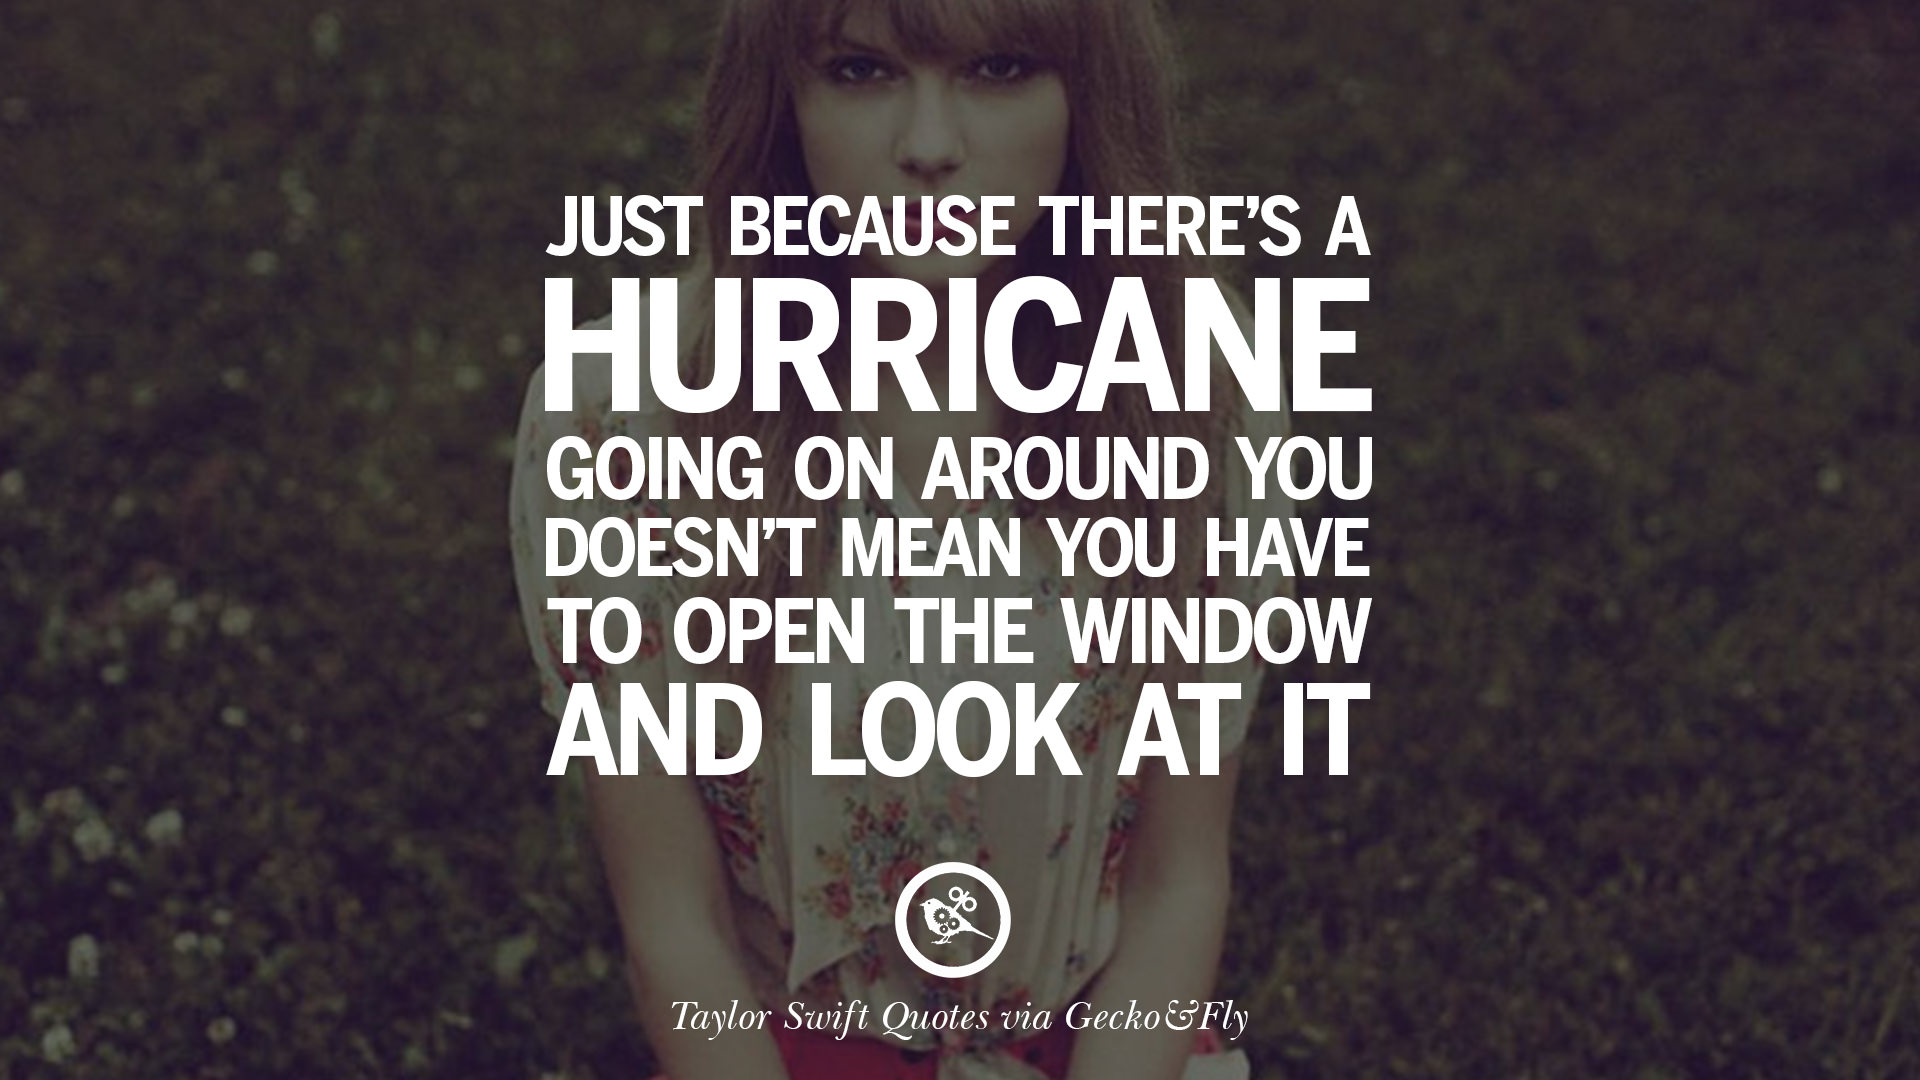 taylor swift quotes 13